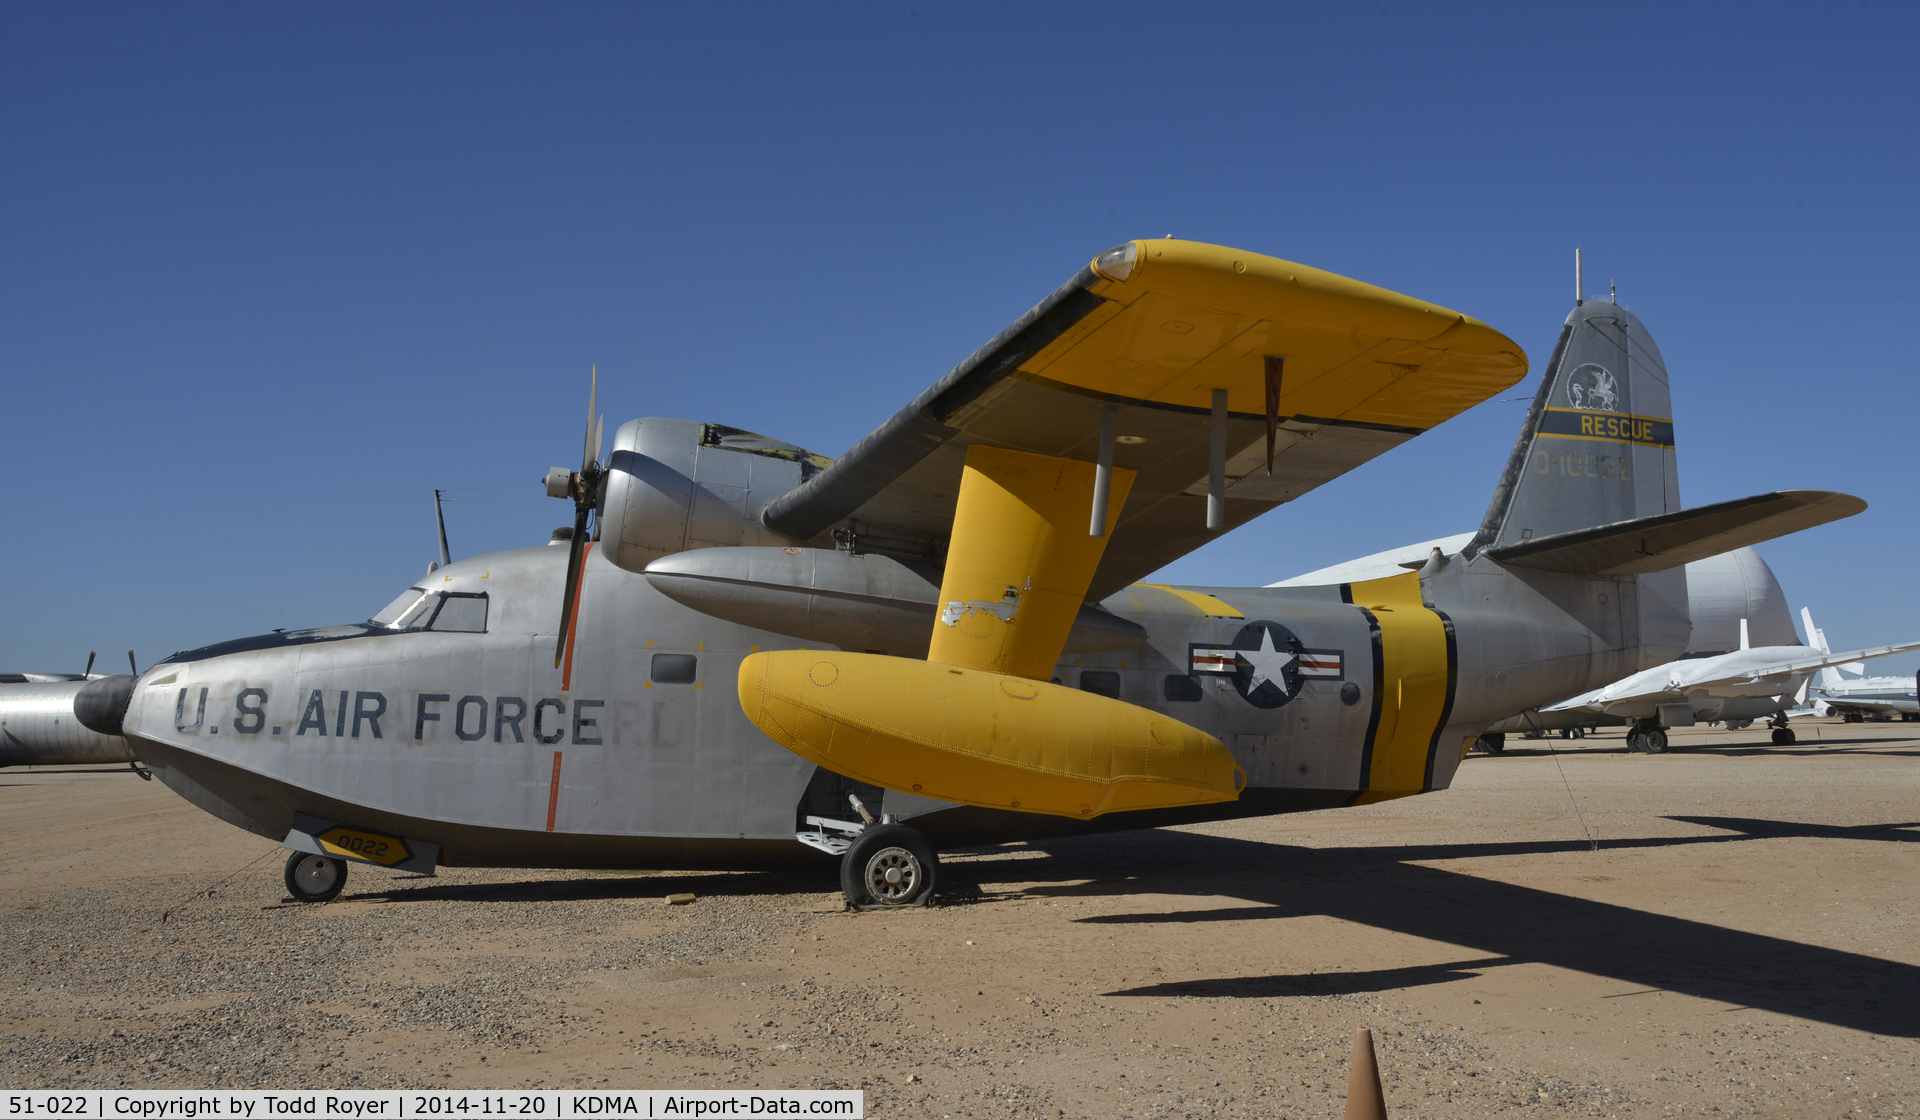 51-022, 1951 Grumman HU-16A Albatross C/N G-96, On display at the Pima Air and Space Museum